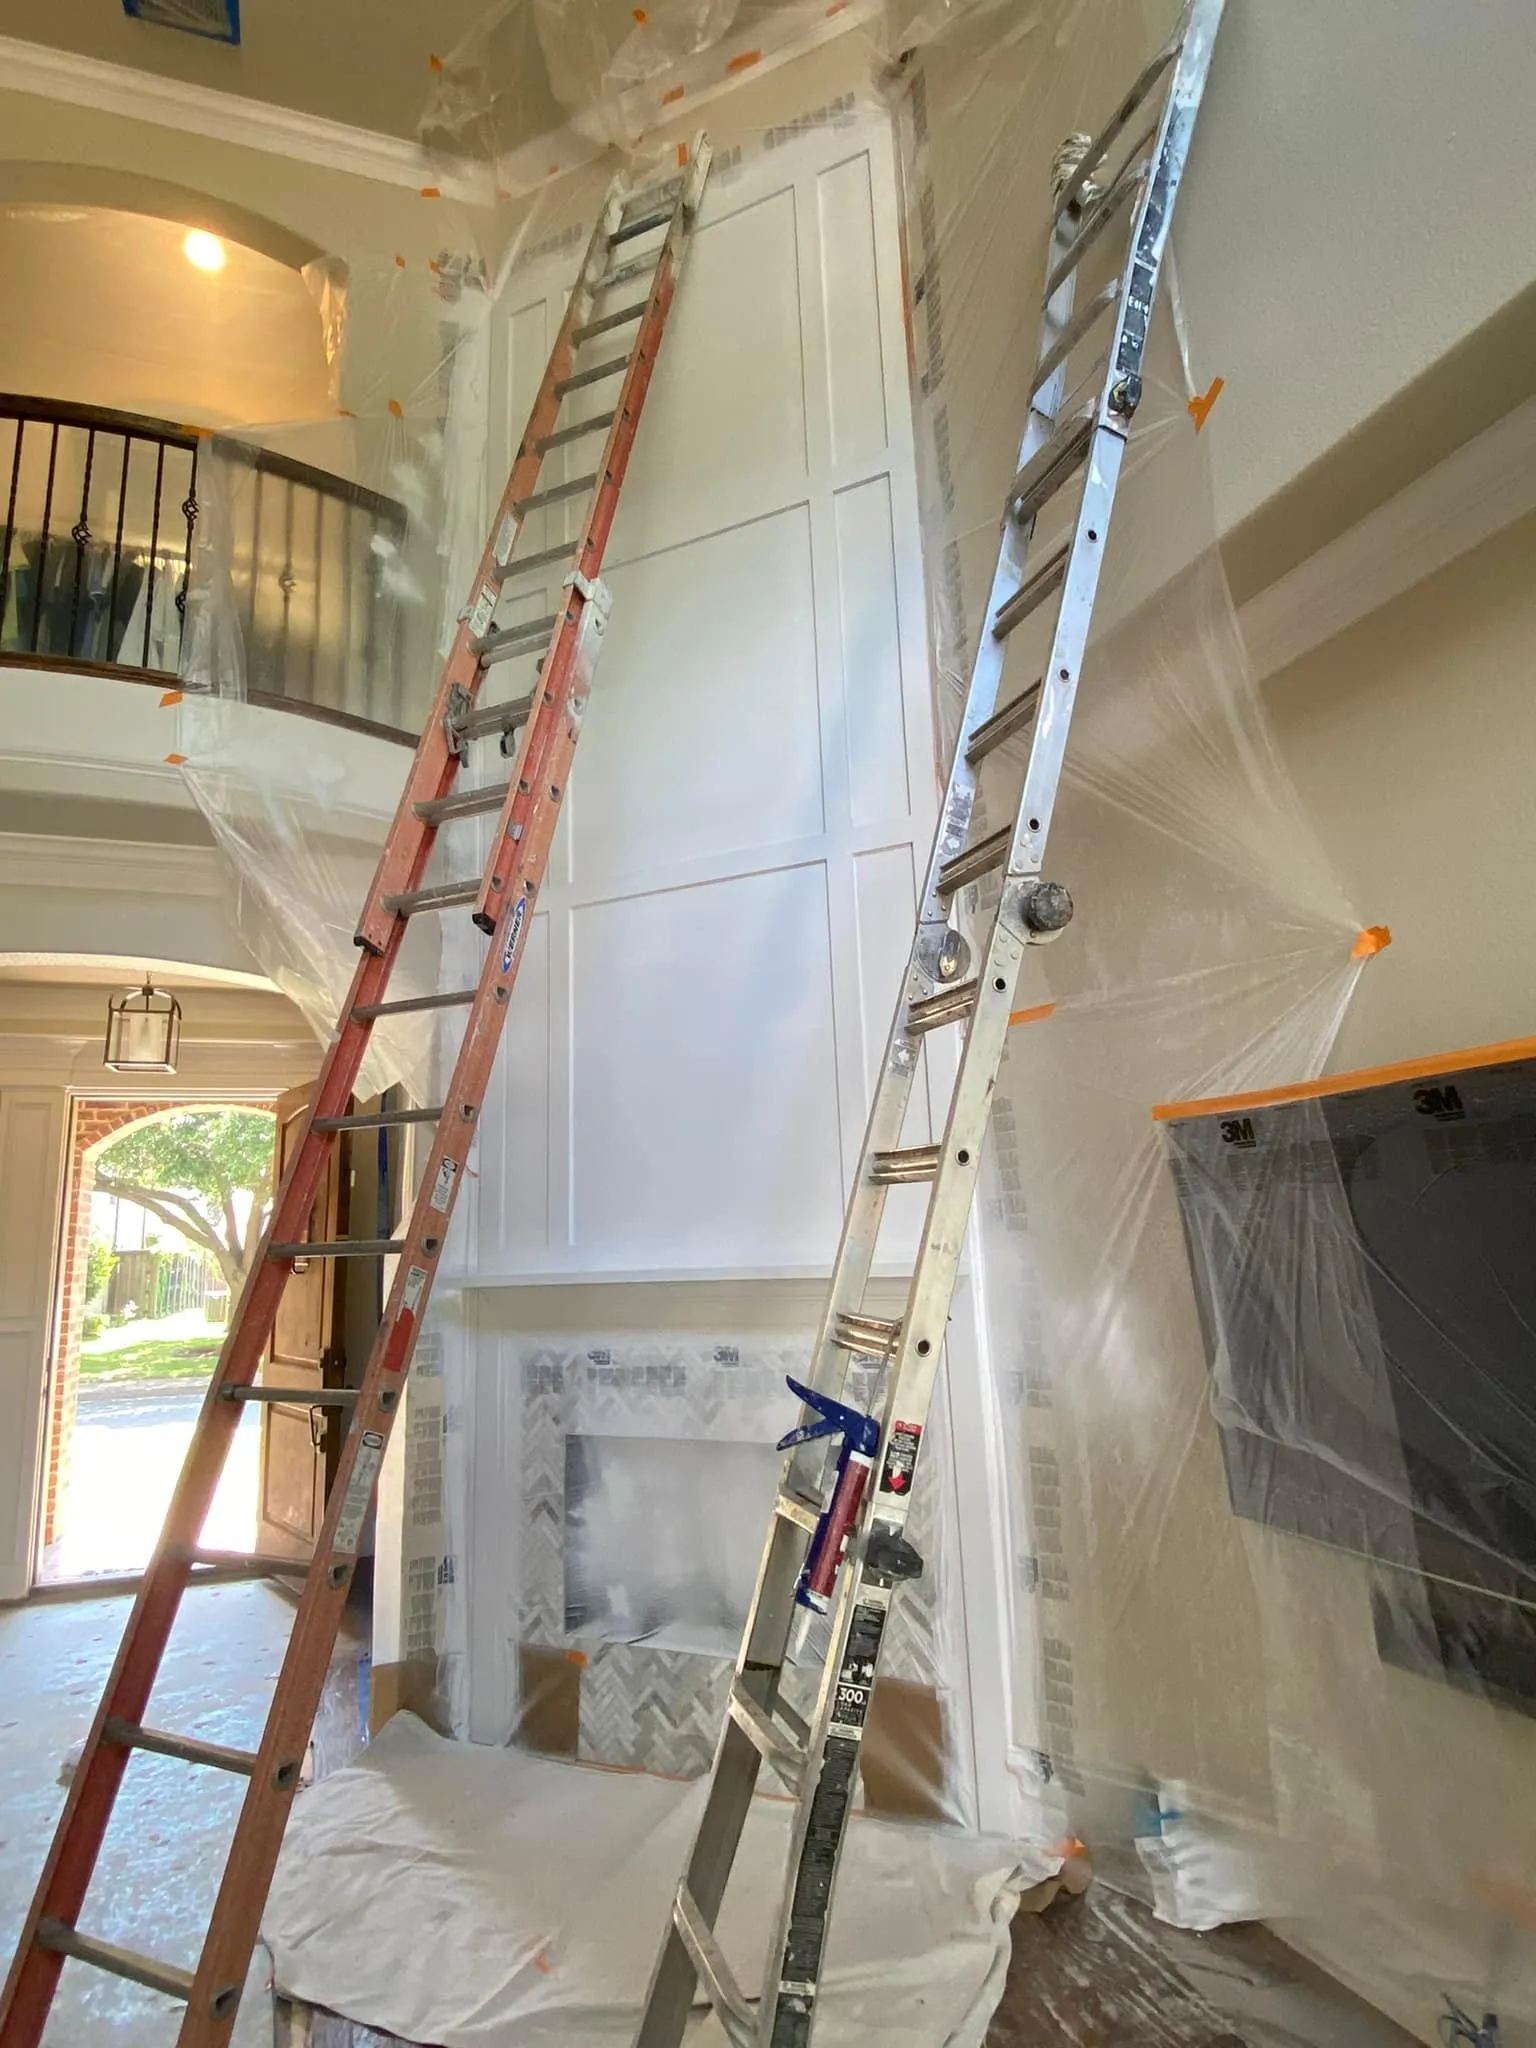 Drywall and Plastering for American Harbor Painting in Fort Worth, Texas